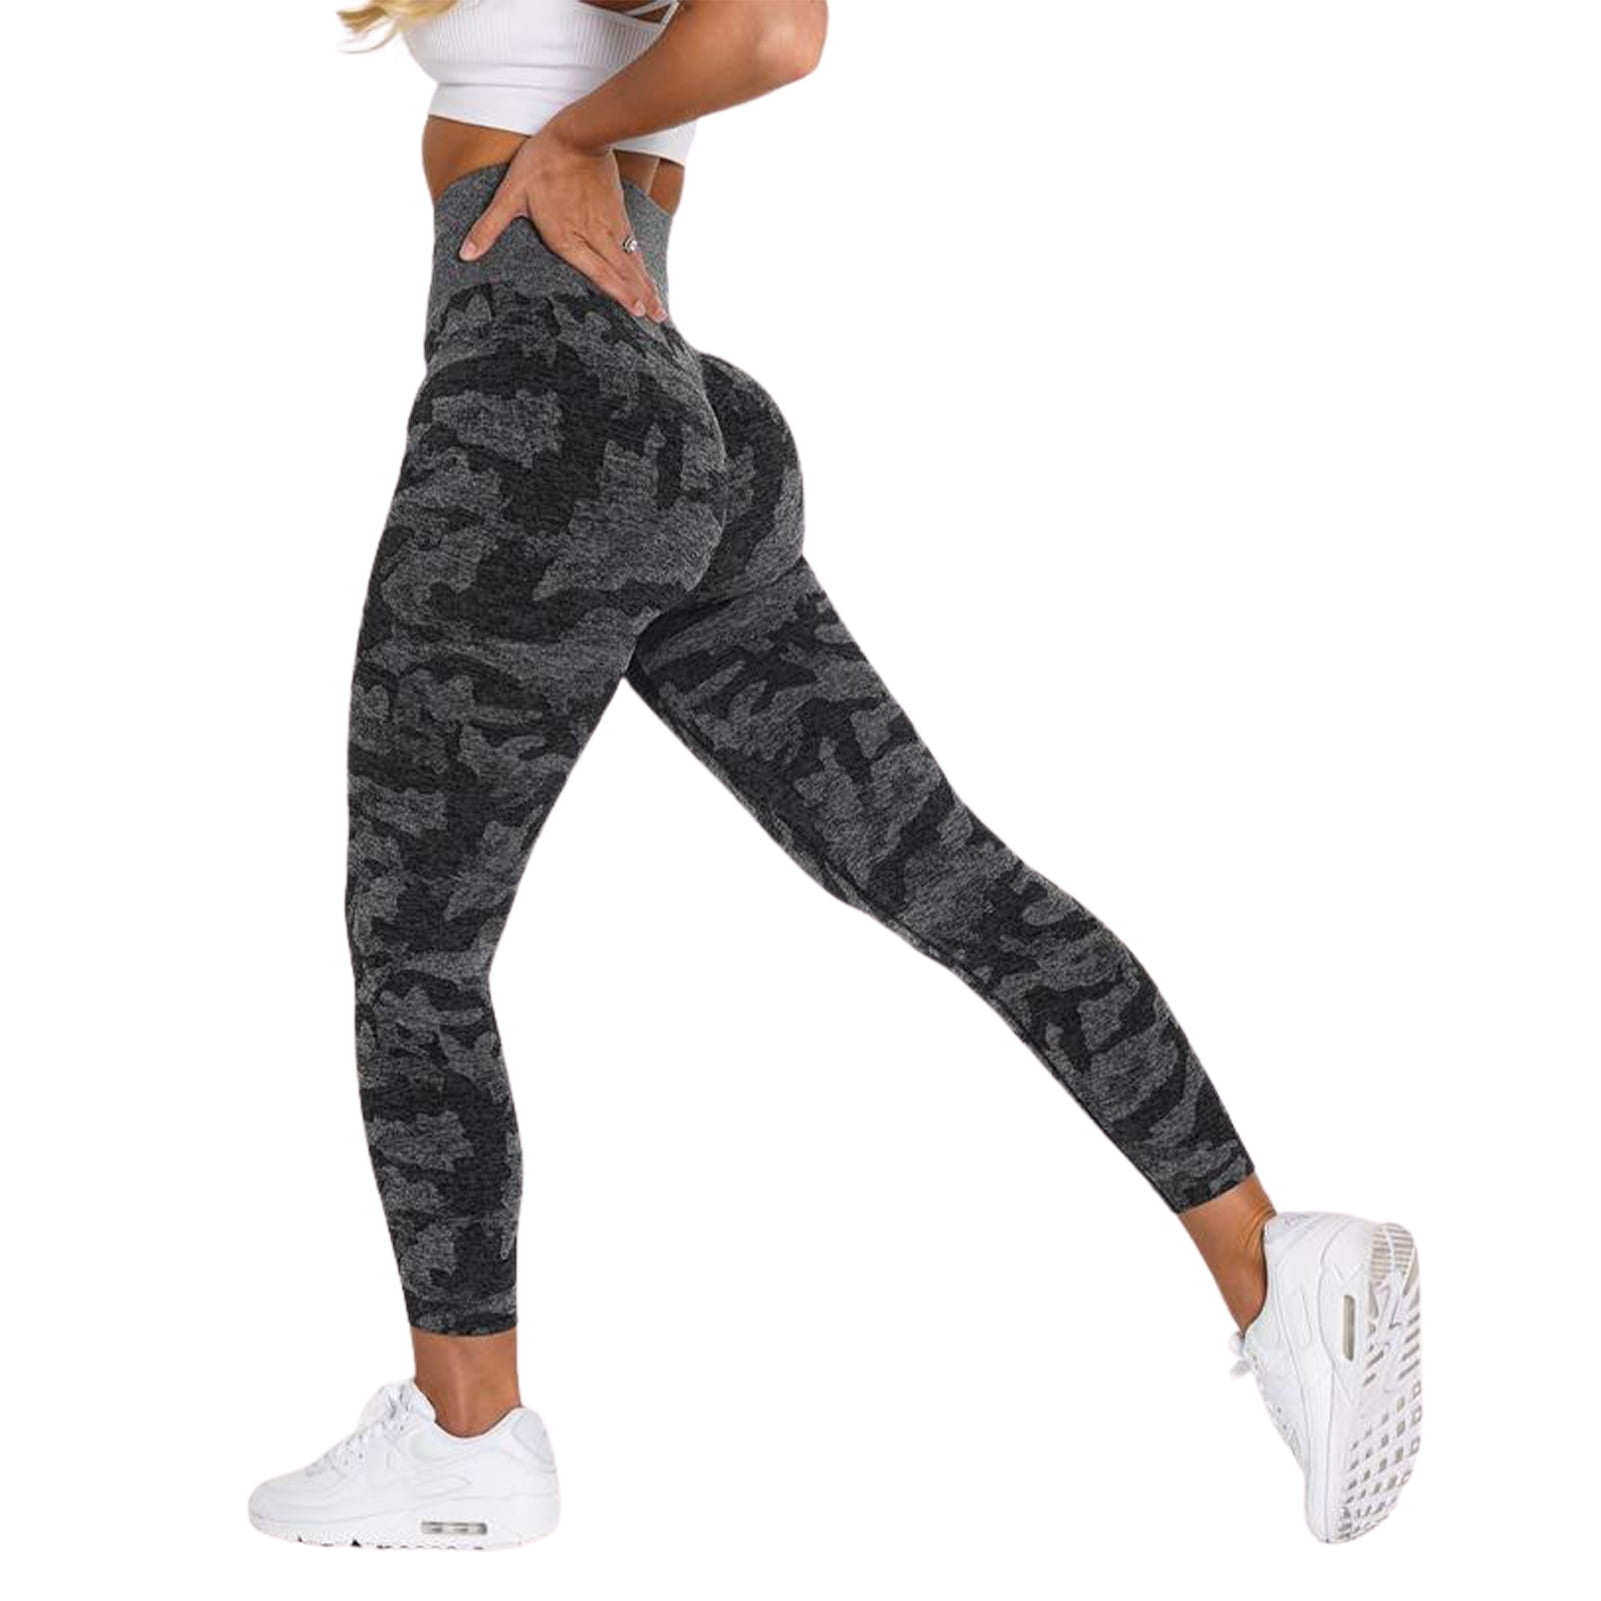 Details about   Women's Yoga Running Slim Leggings Mesh Gym Fitness Pants Quick Drying Trousers 